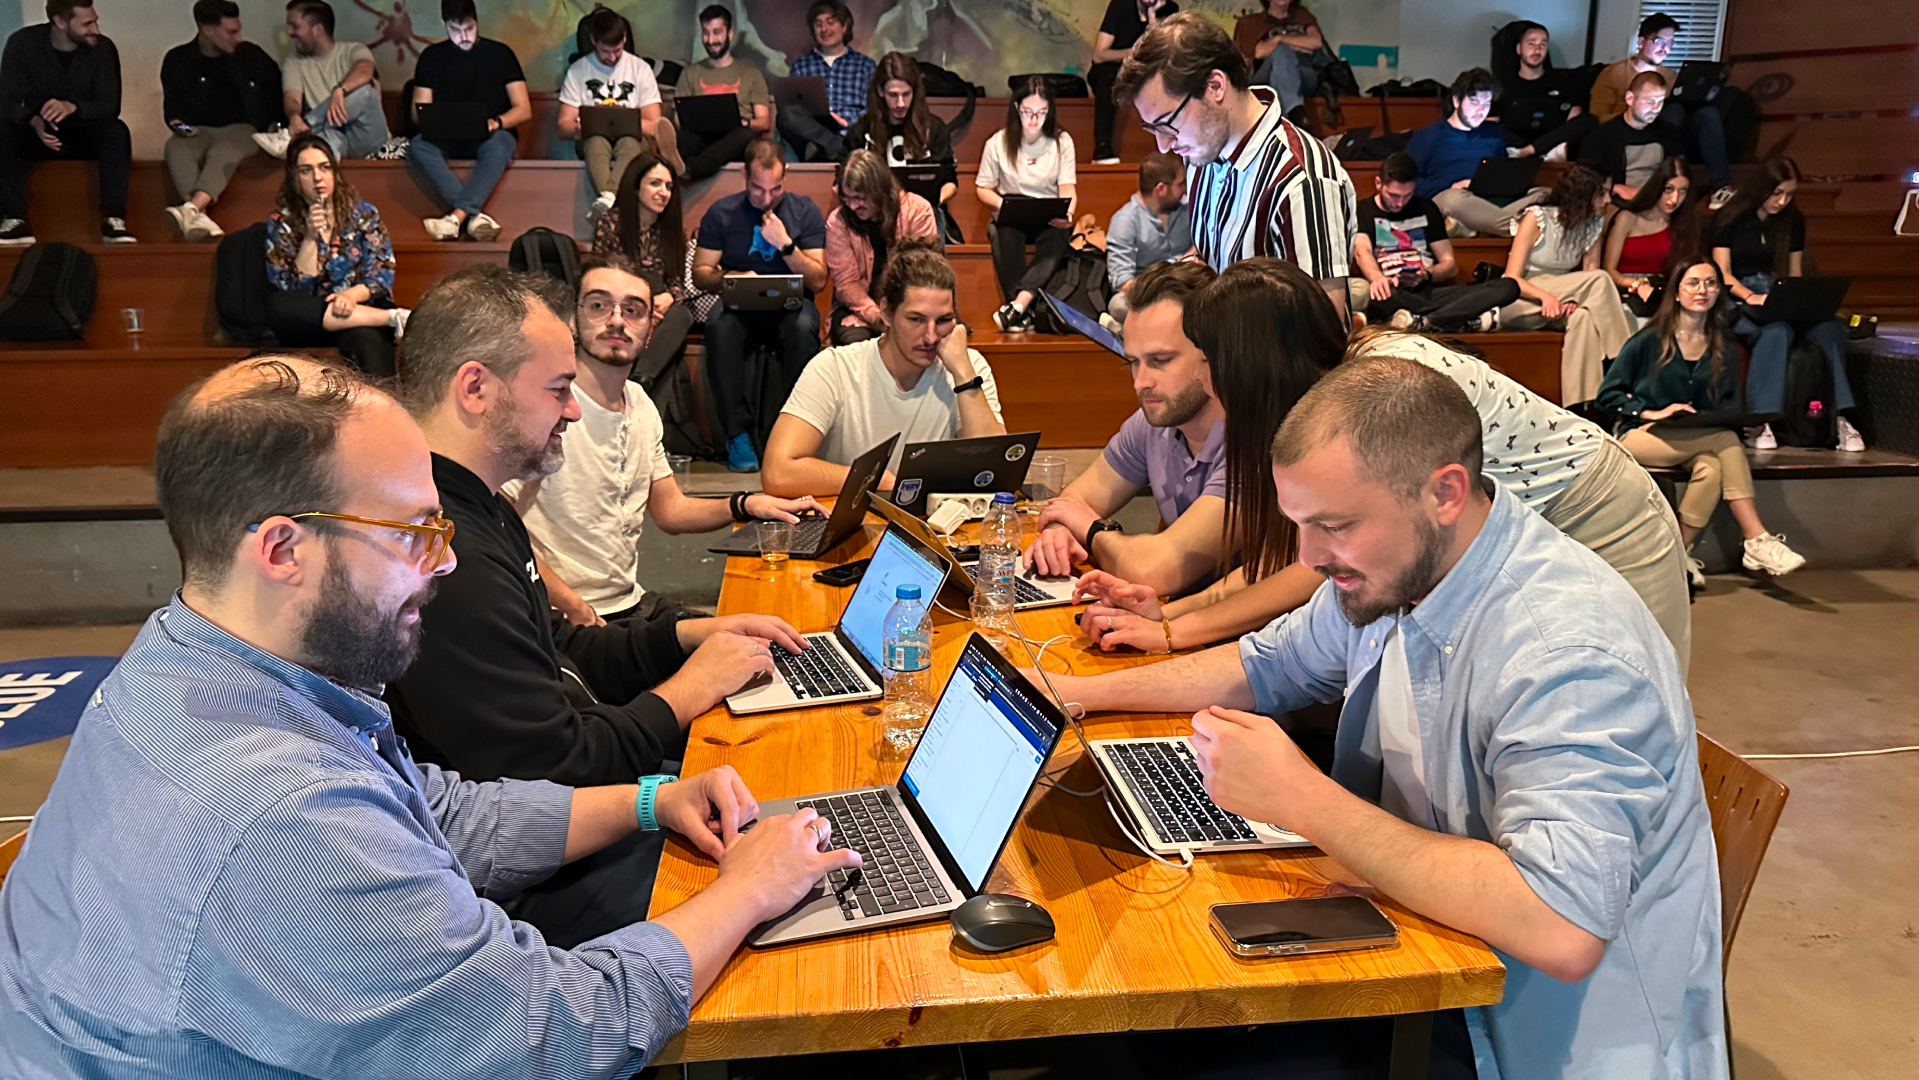 Seven people at one table on laptops at the AI + Data Community Tour stop in Greece, with others working in stadium seating in the background.